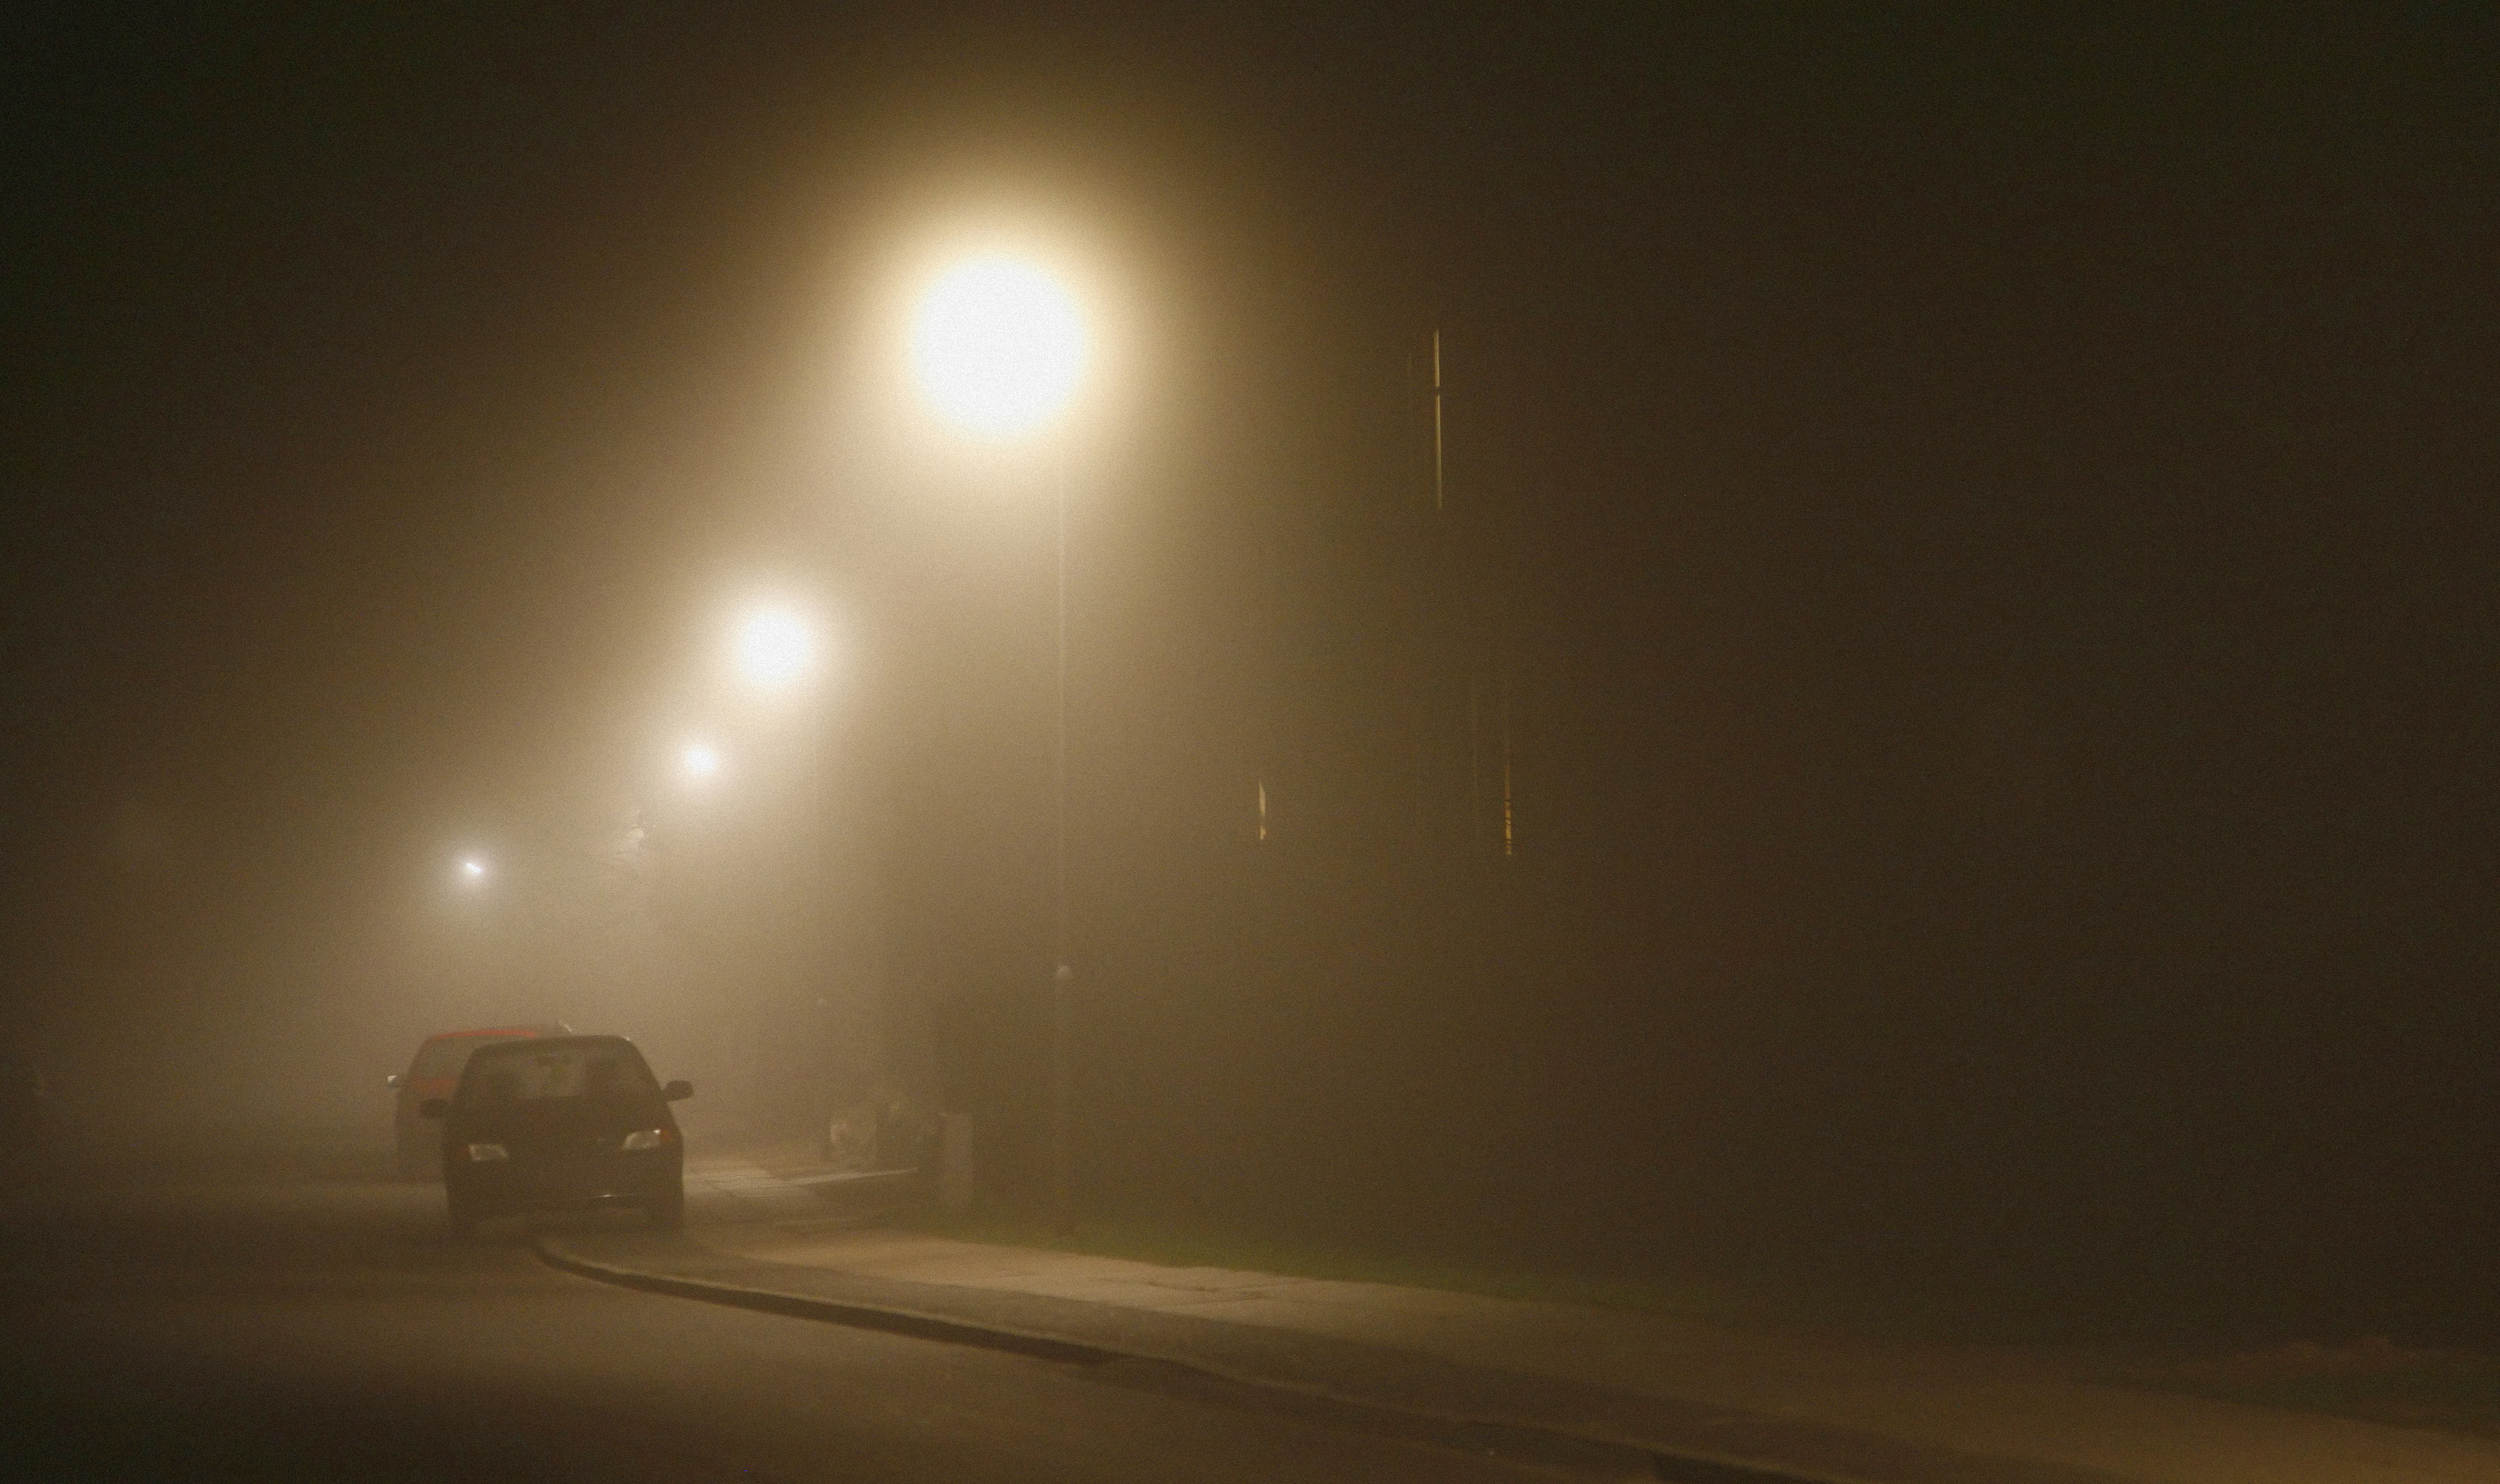 Car parked near the house at night on the street. | Source: Shutterstock